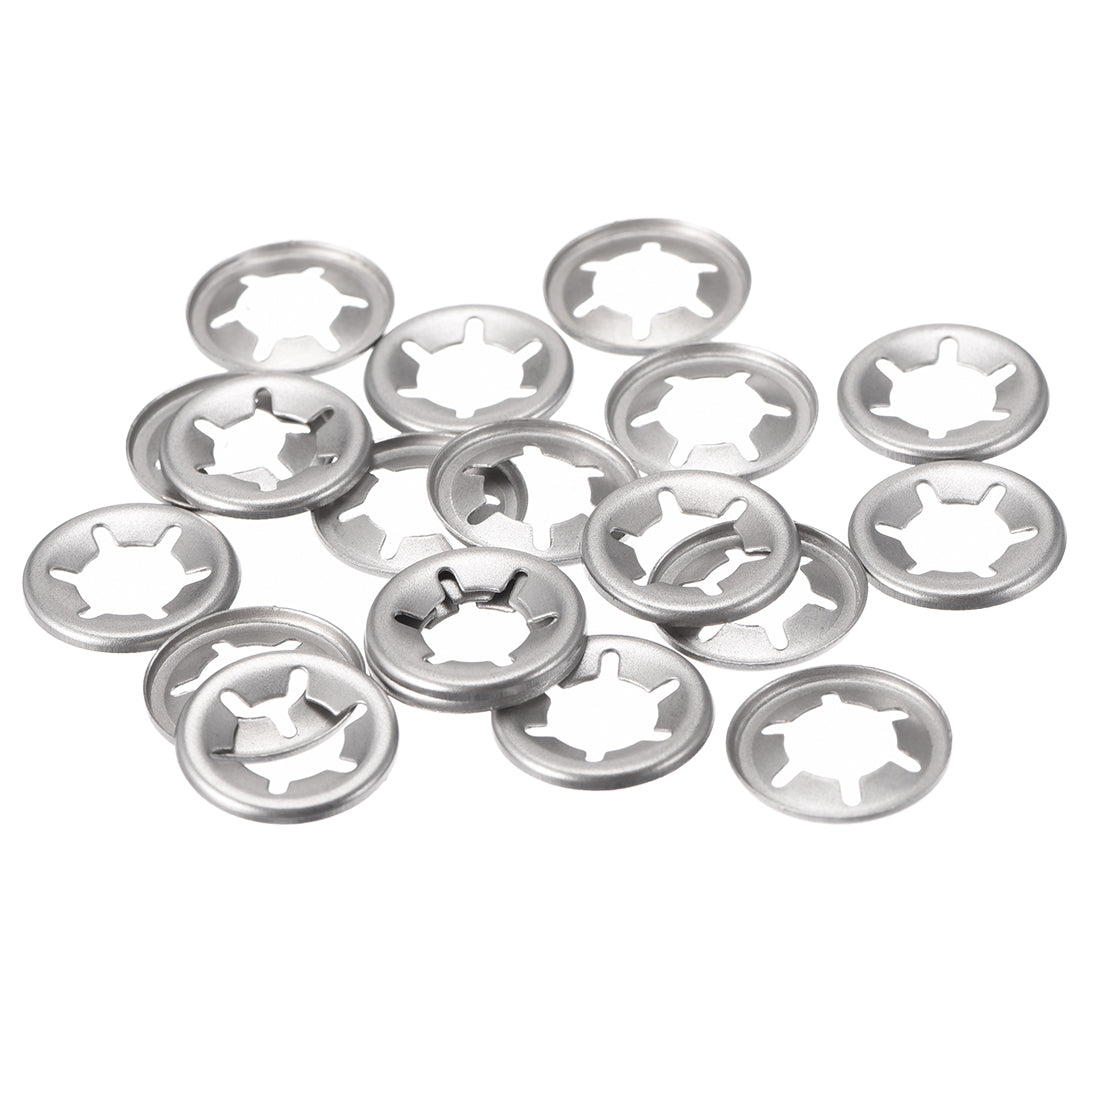 Uxcell Uxcell M12 Internal Tooth Star Locking Washer 11.2mm I.D. 24.5mm O.D. Lock Washers Push On Locking Speed Clip, 304 Stainless Steel 20pcs